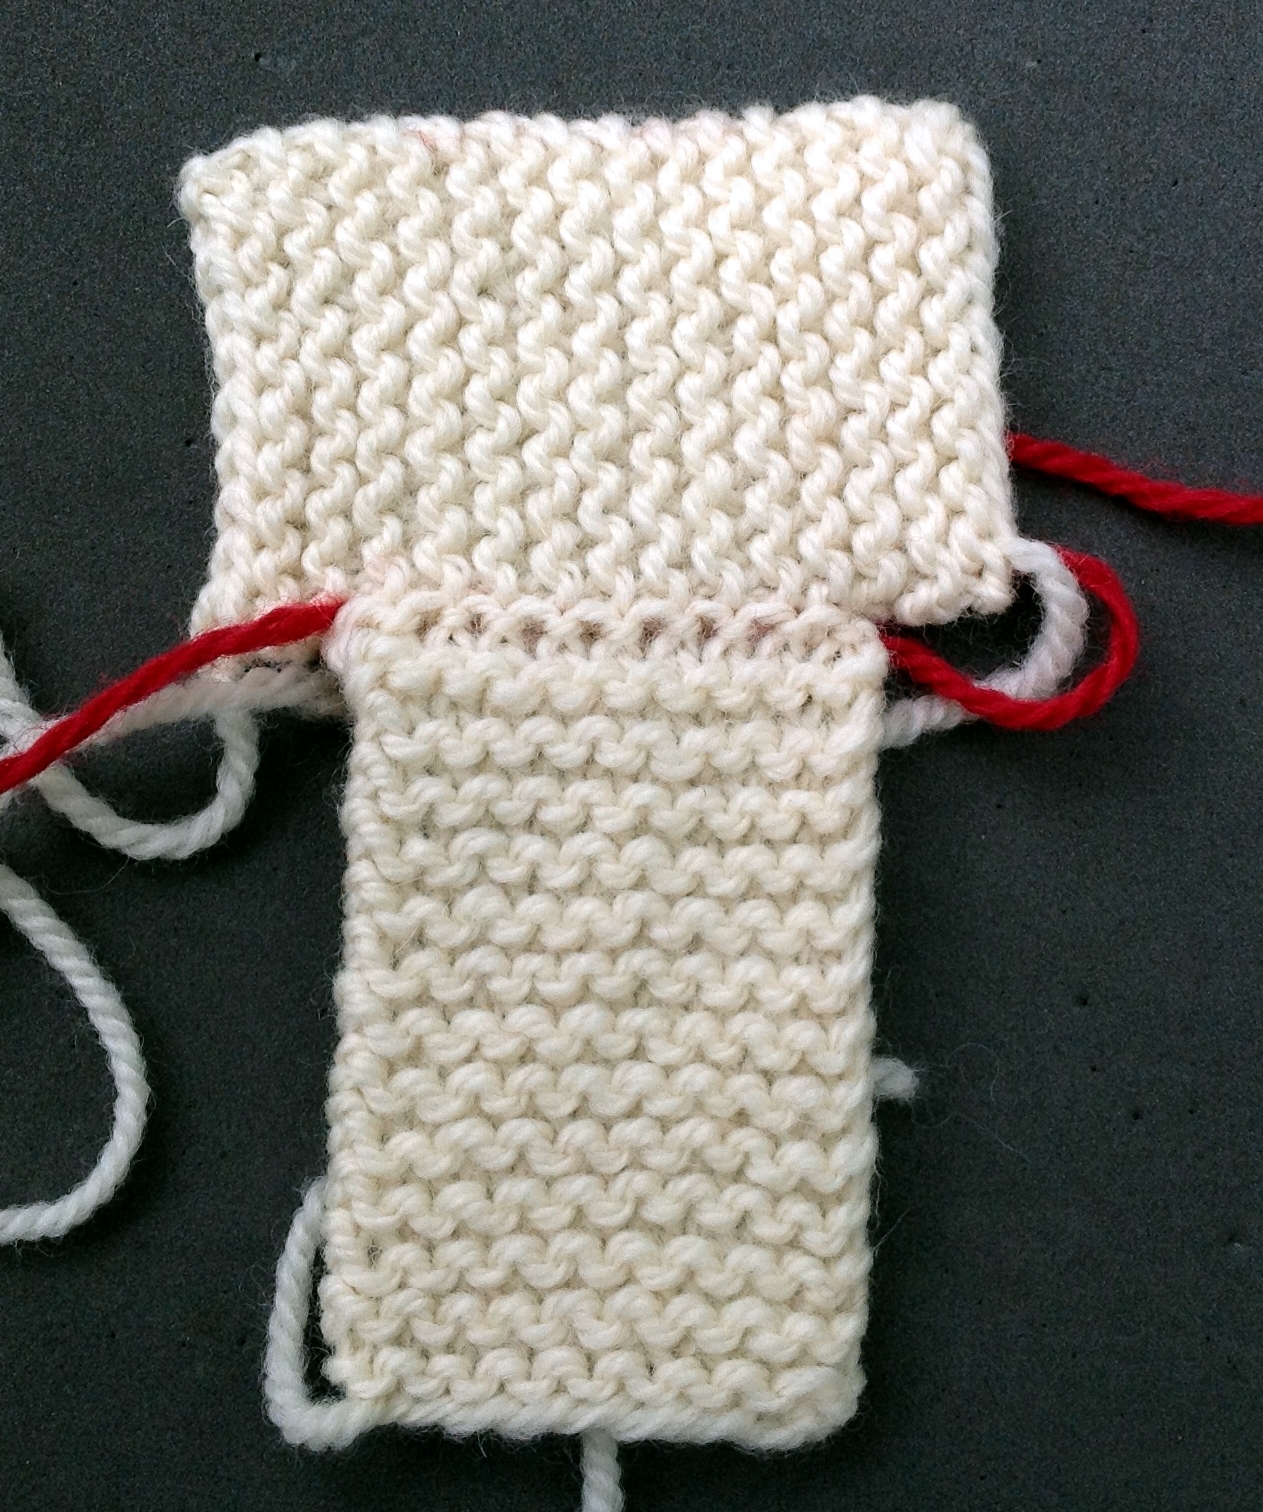 How to Sew a Vertical Edge to a Horizontal Edge - How to Knit